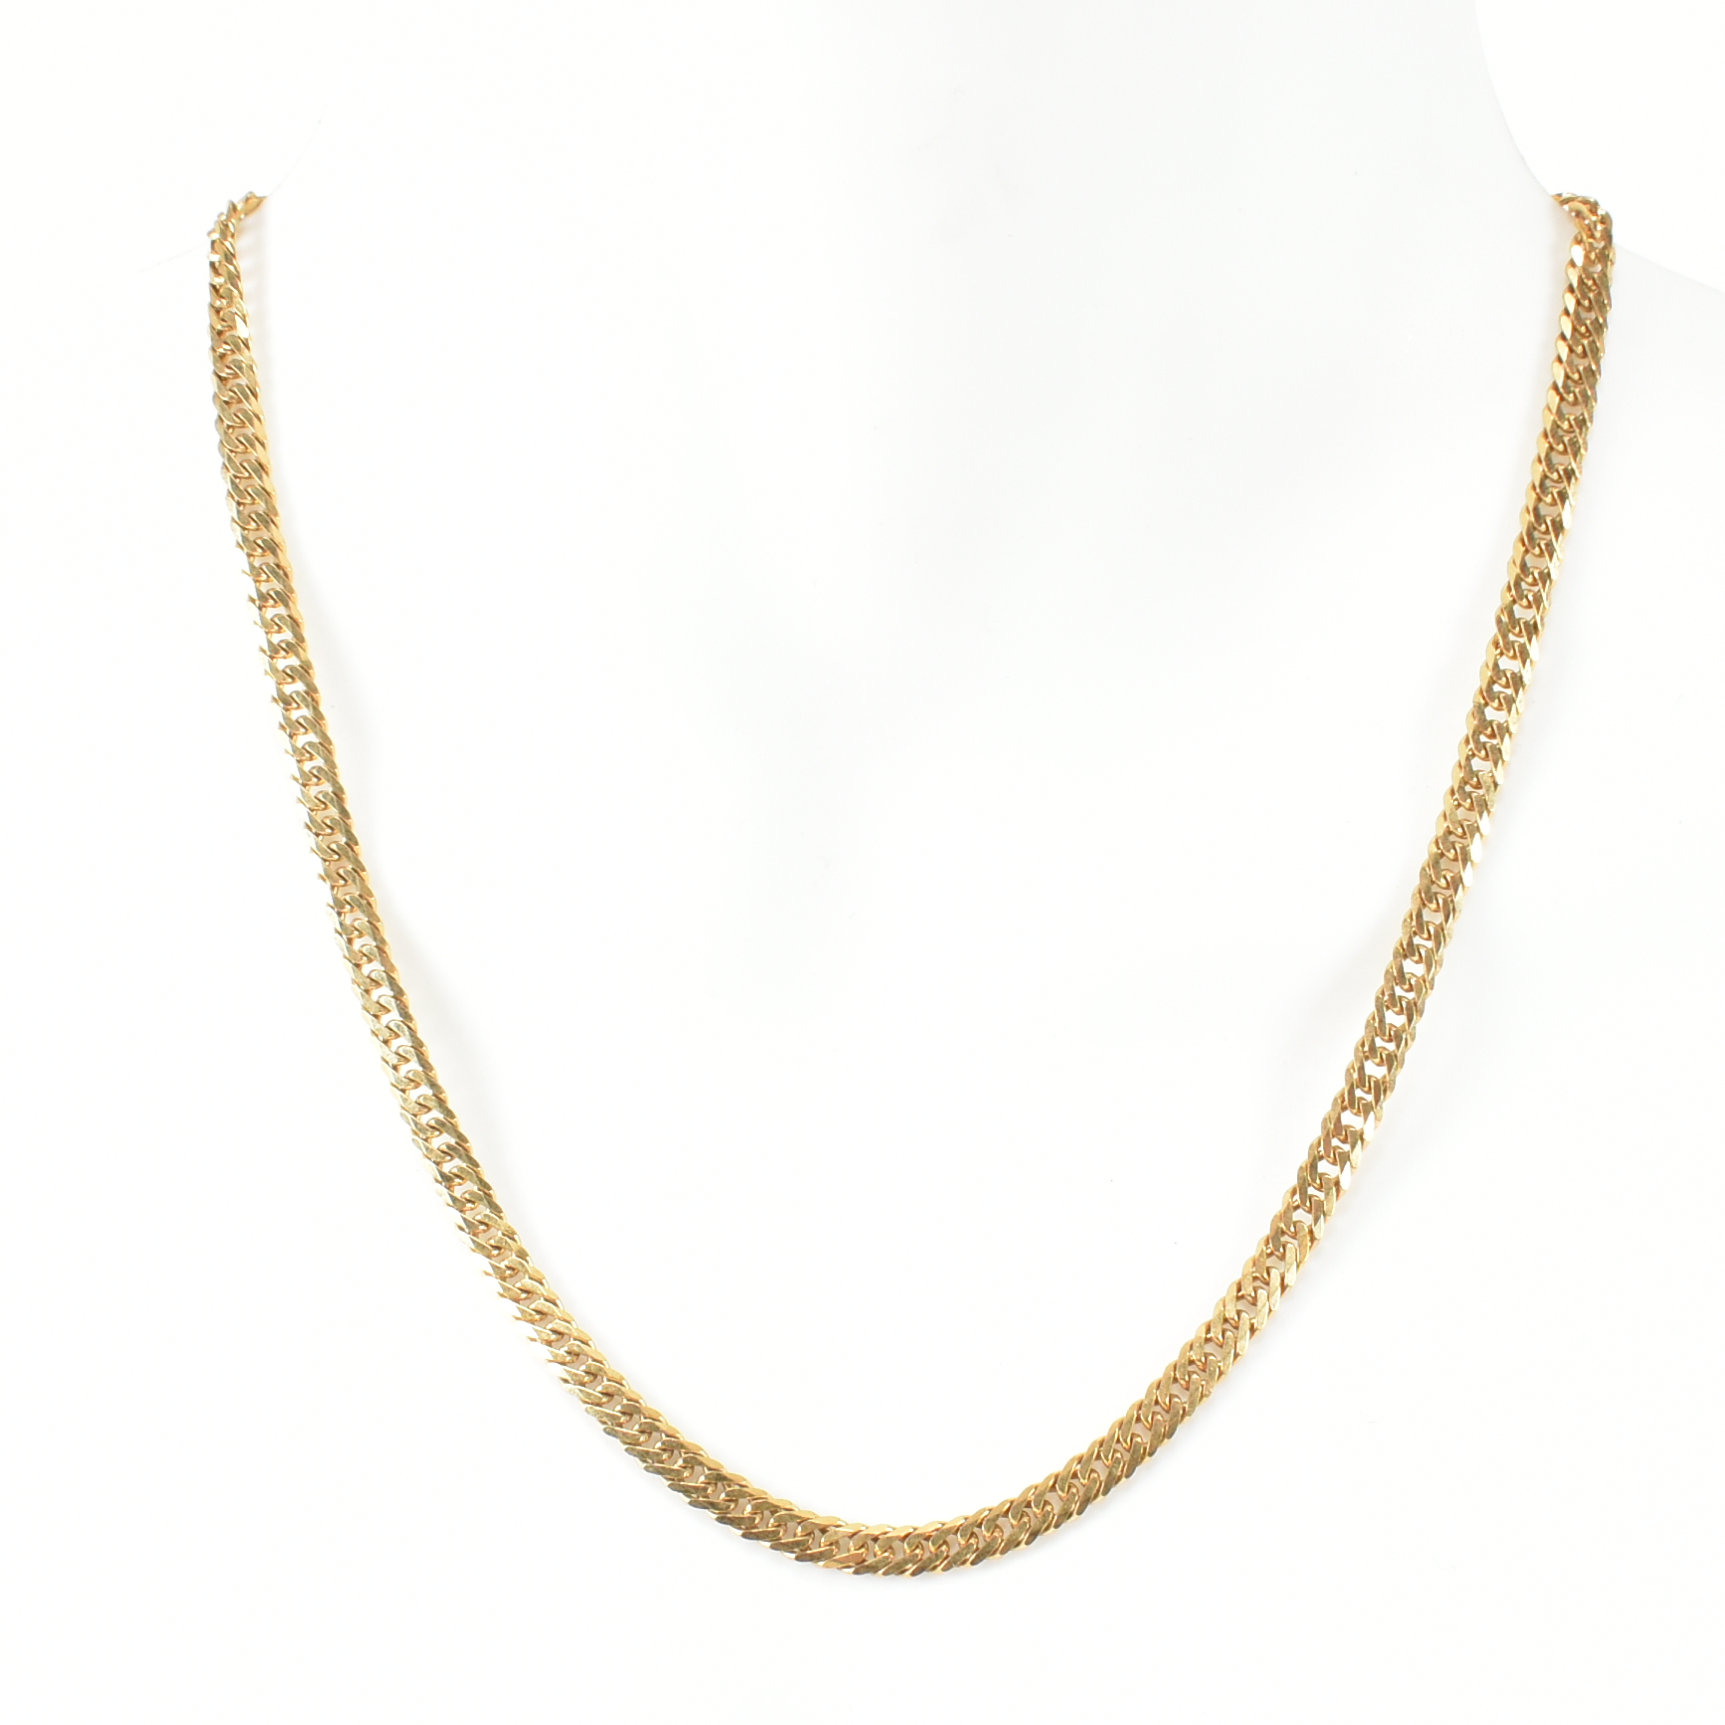 HALLMARKED 9CT GOLD FLAT CURB LINK CHAIN NECKLACE - Image 4 of 5